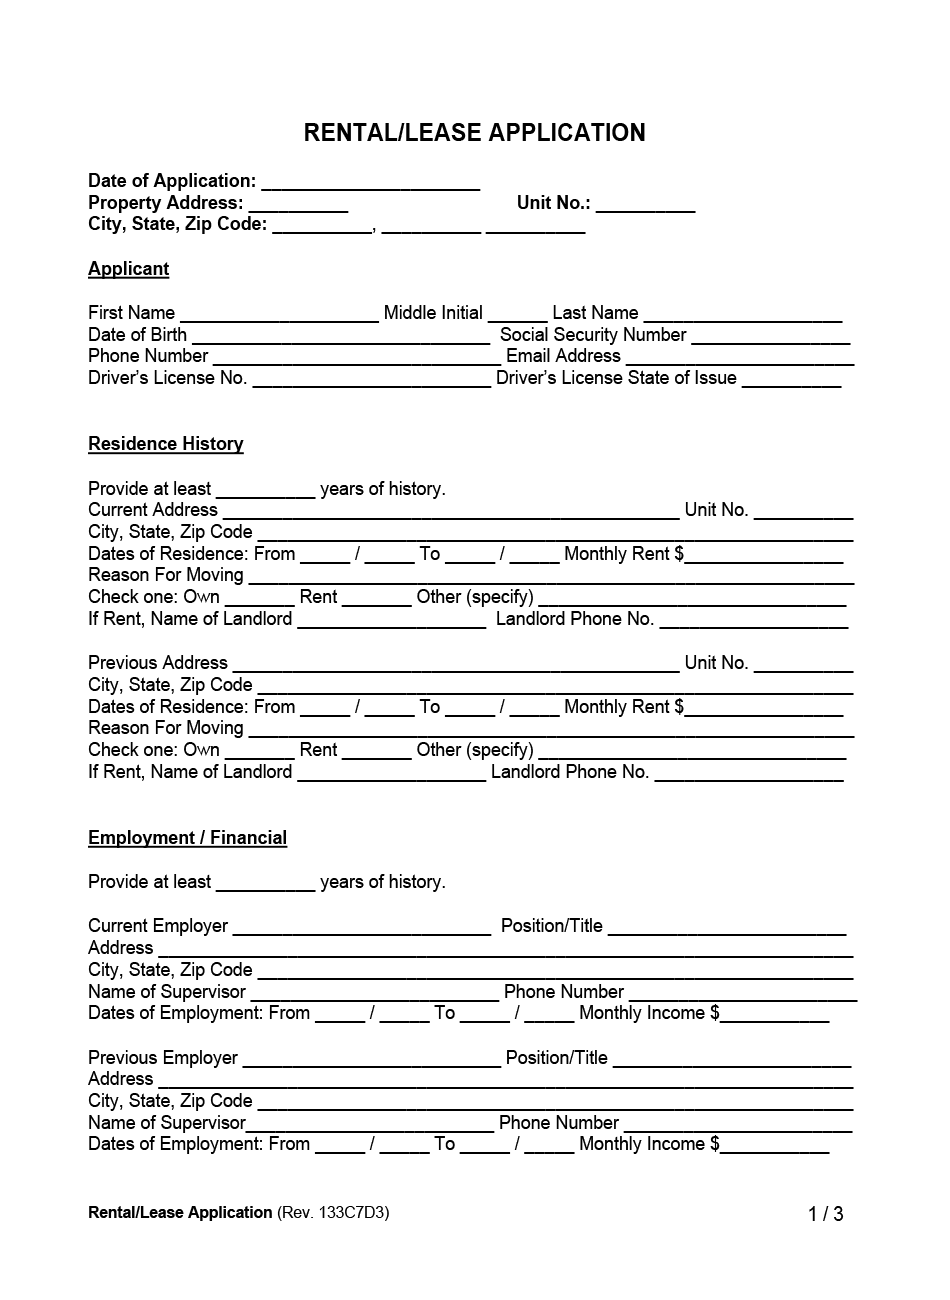 Rental Lease Application Example Form